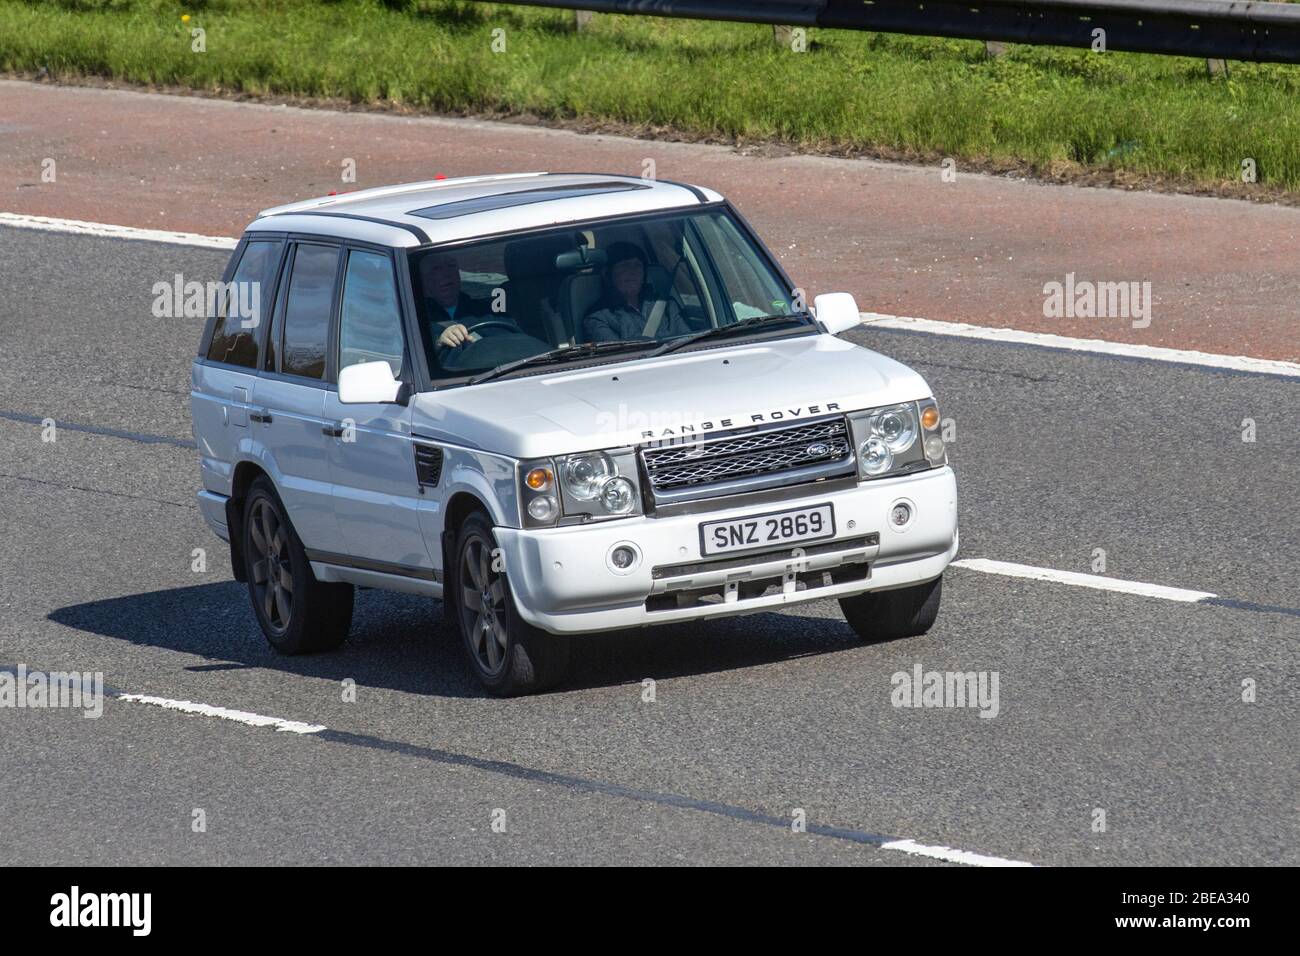 1997 white Land Rover Range Rover HSE Auto; Vehicular traffic moving vehicles, driving vehicle on UK roads, motors, motoring on the M6 motorway highway Stock Photo